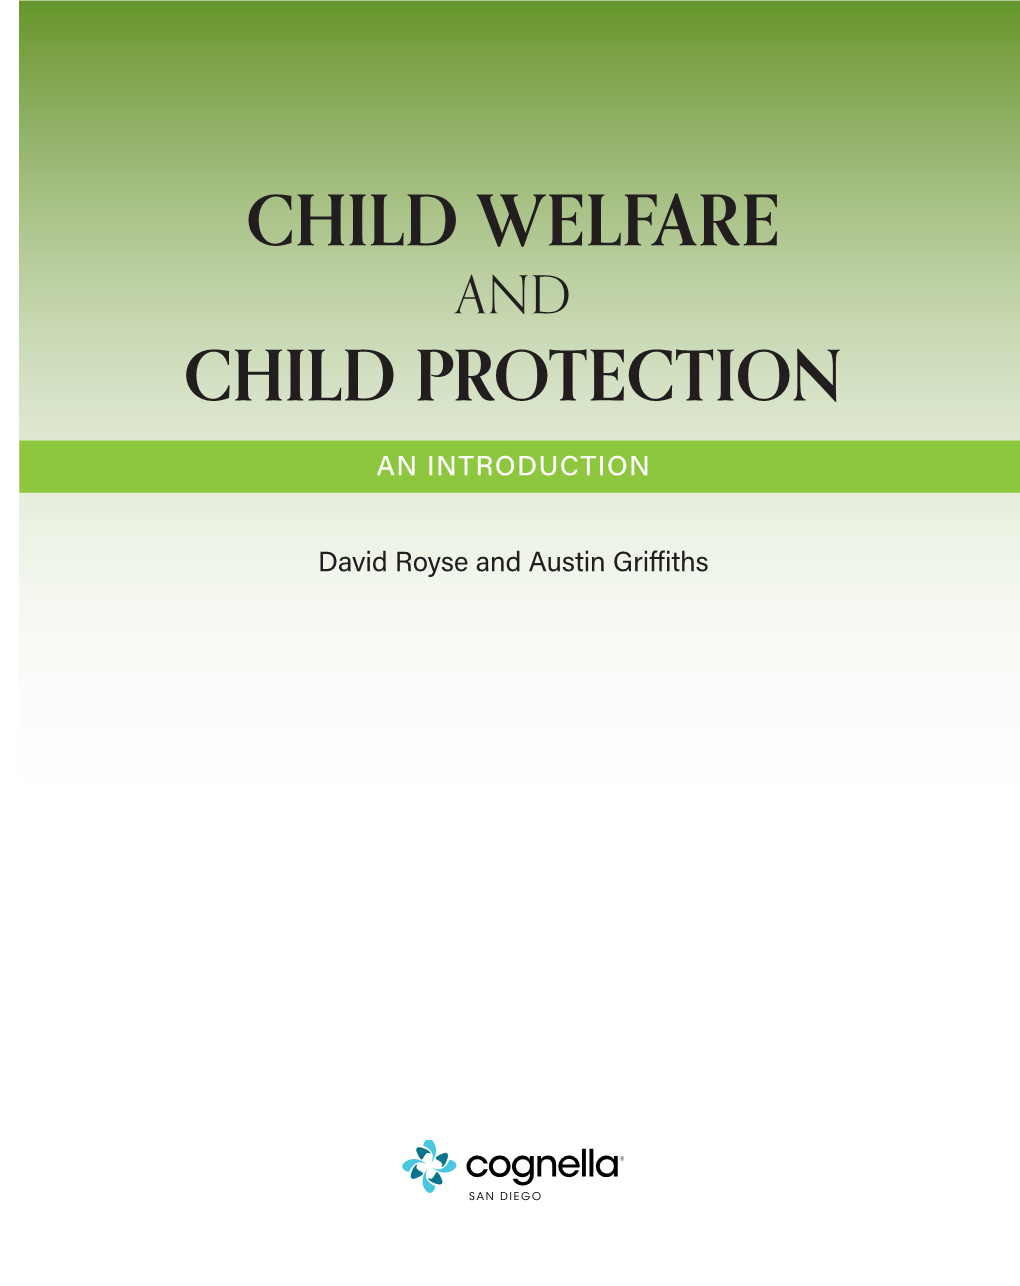 Child Welfare Child Protection and an Introduction